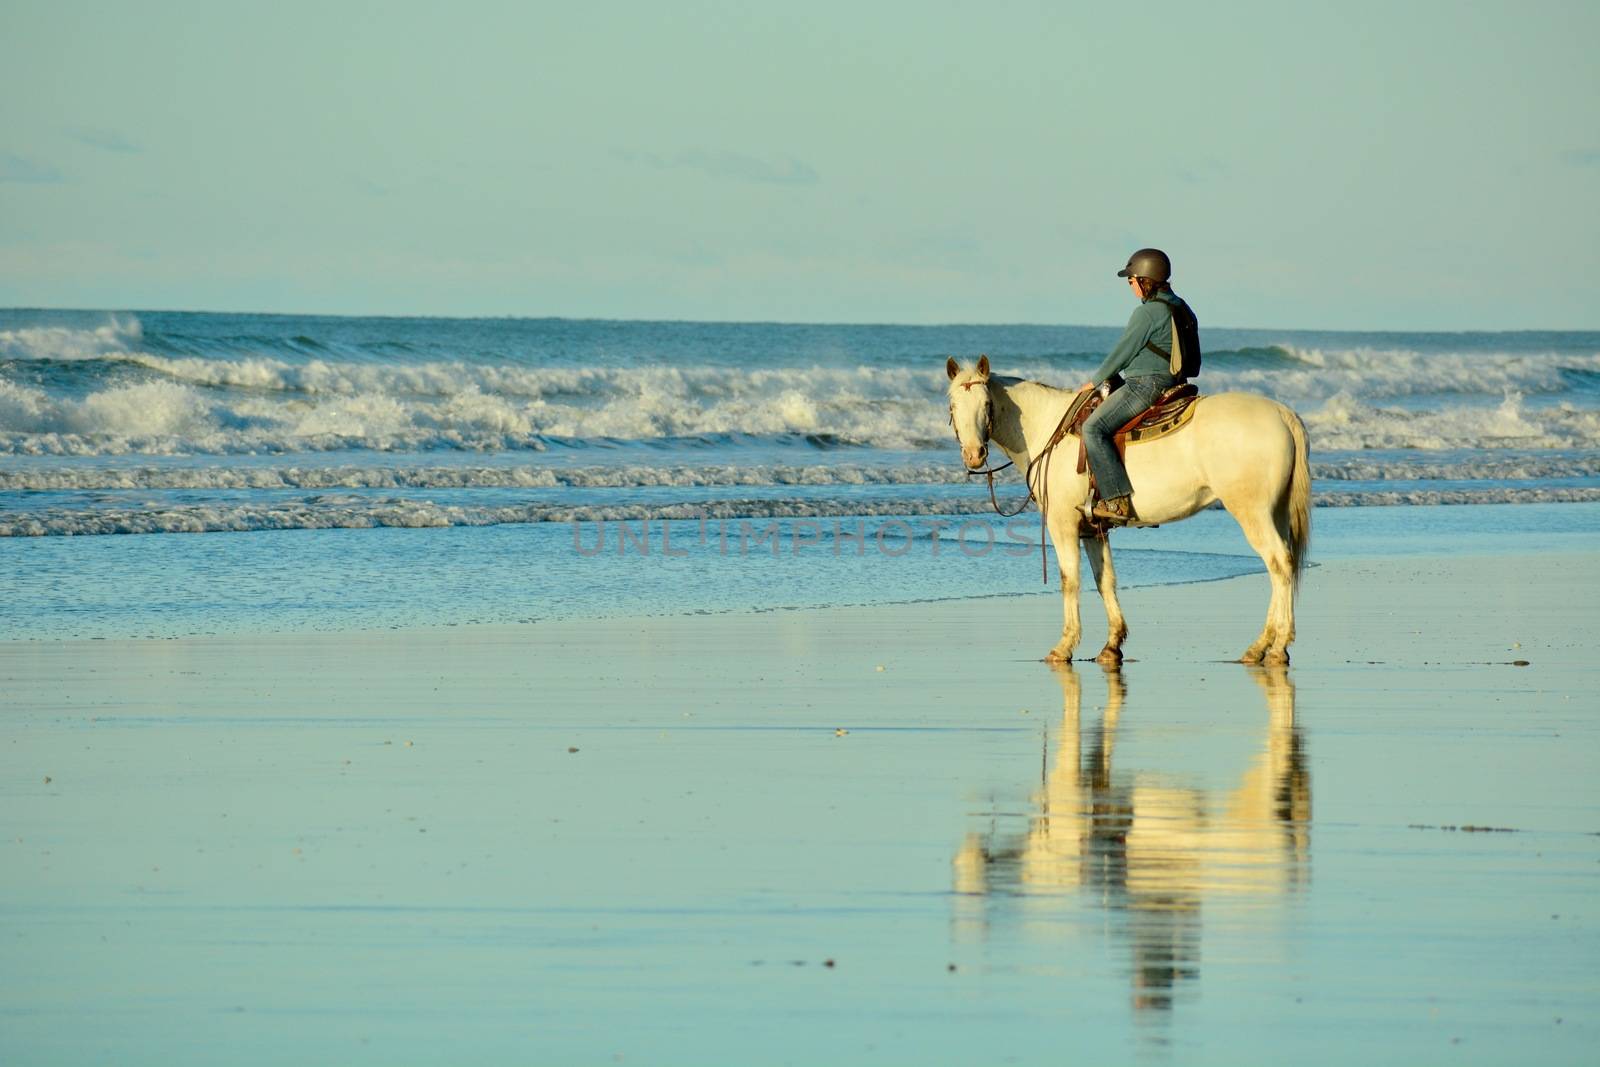 Holidays at the sea; winter time in New Zealand; riding a horse at a seashore